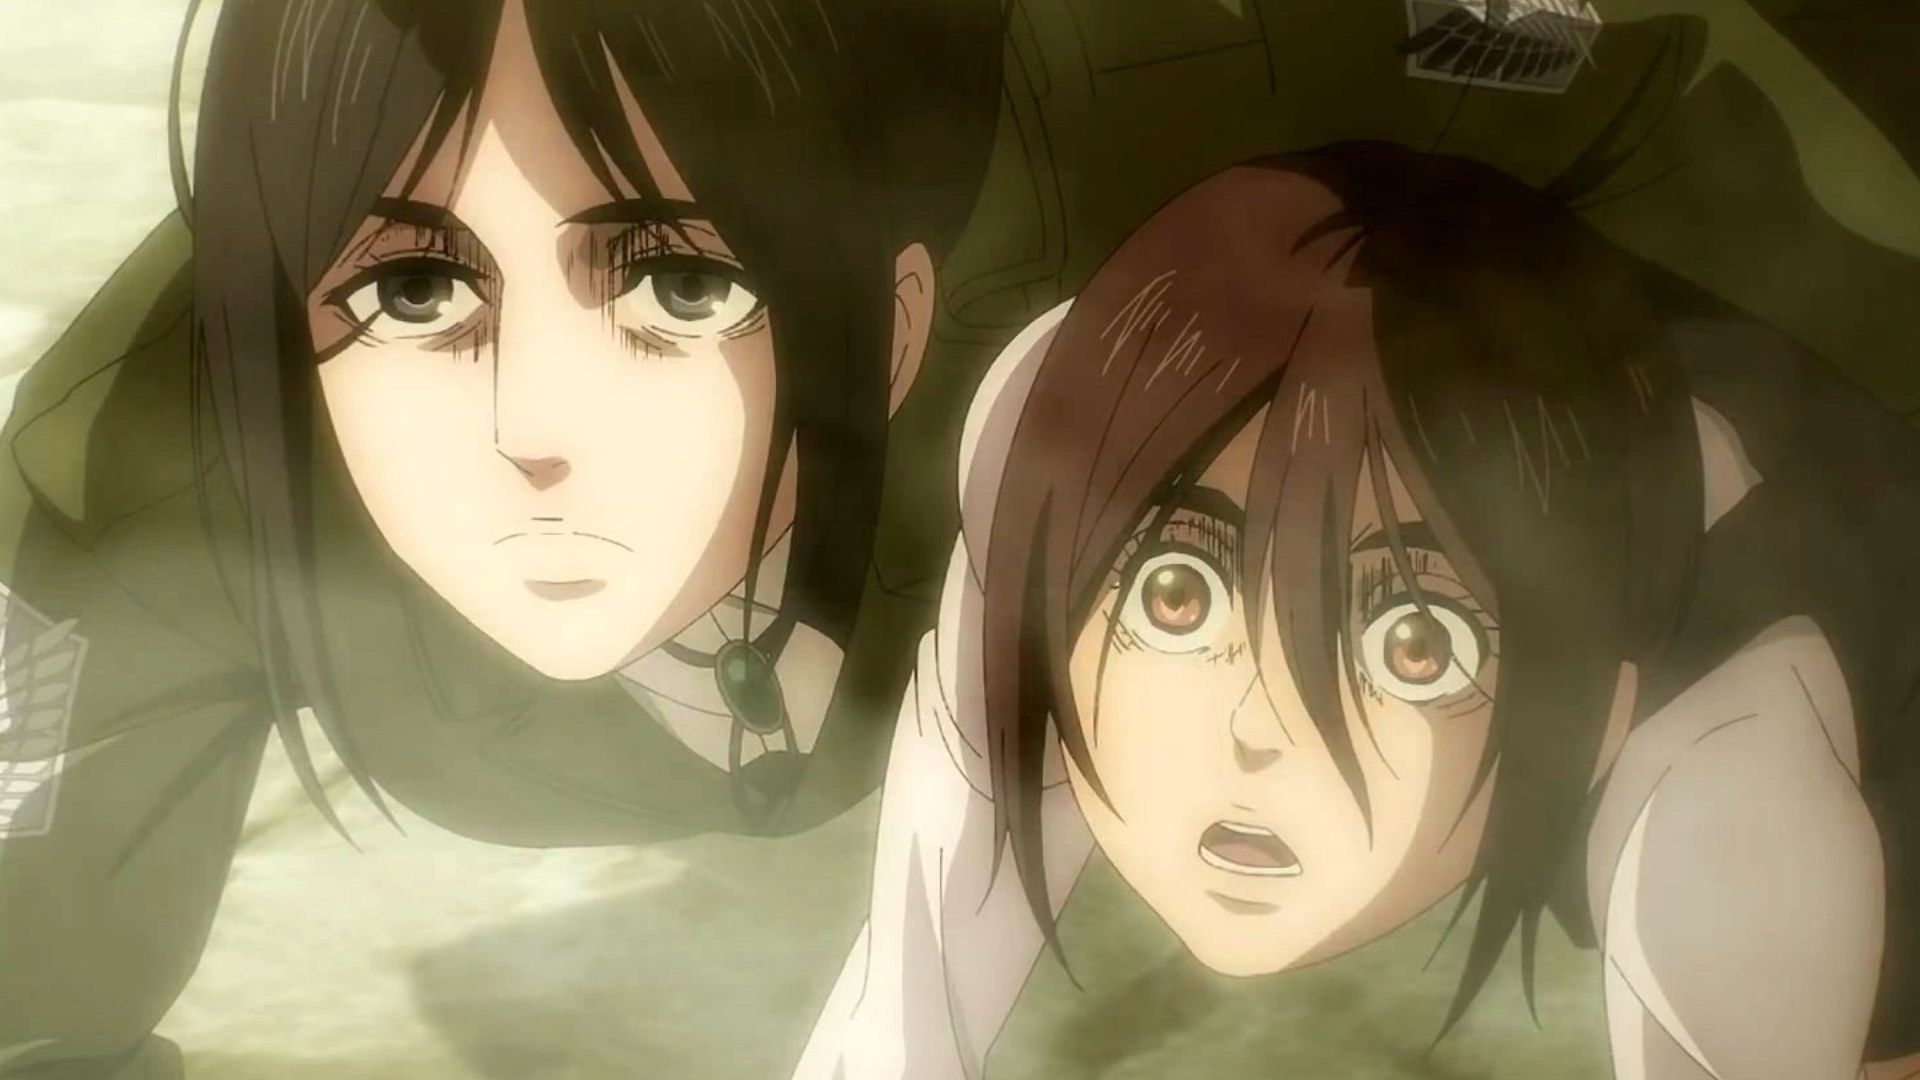 Top 5 Hottest Attack on Titan Anime Characters